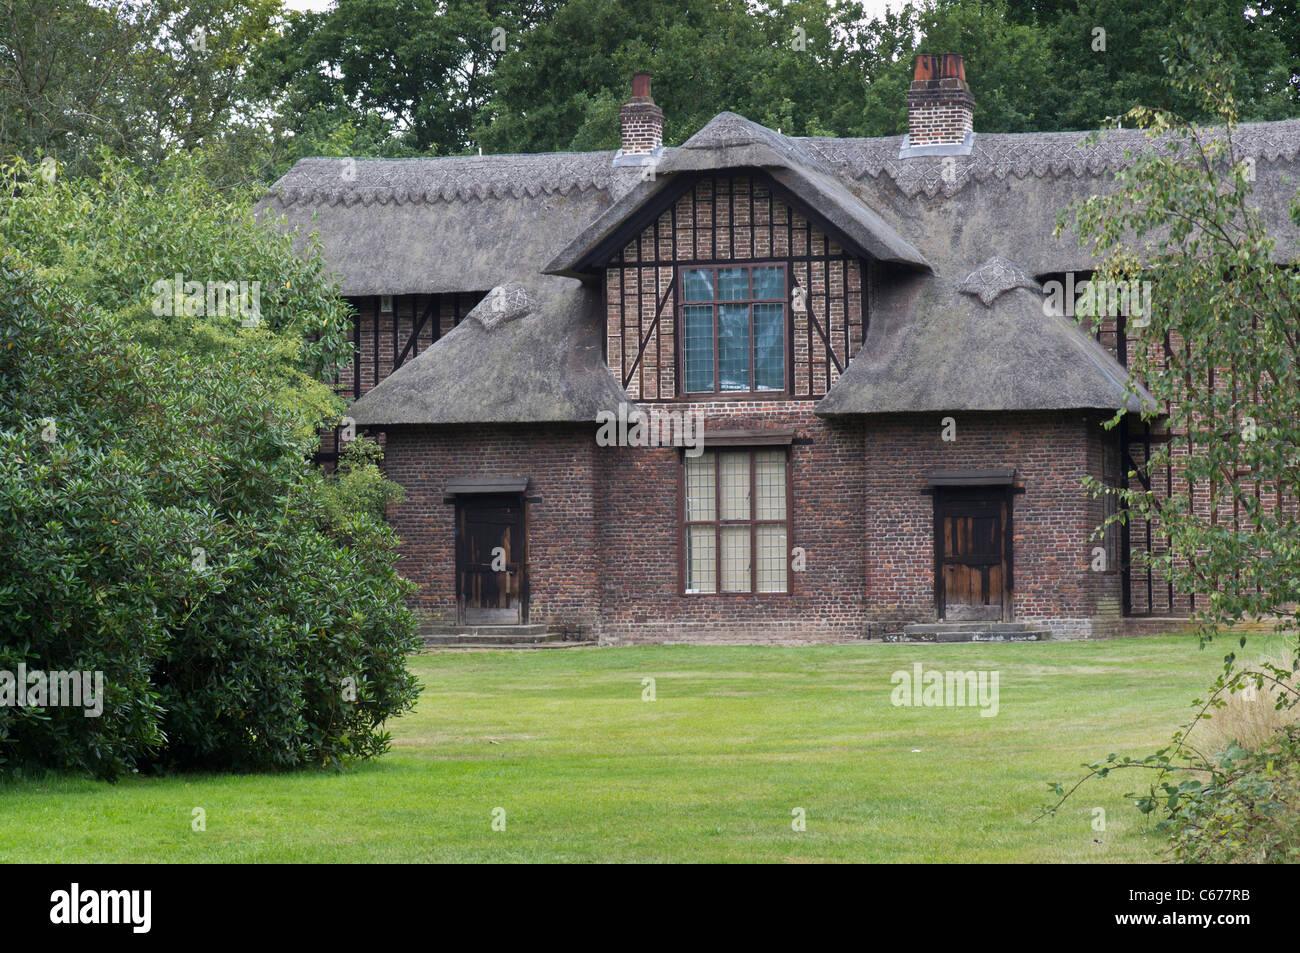 London, Kew Gardens, Royal Horticultural Society - Queen Charlotte's Cottage Stock Photo